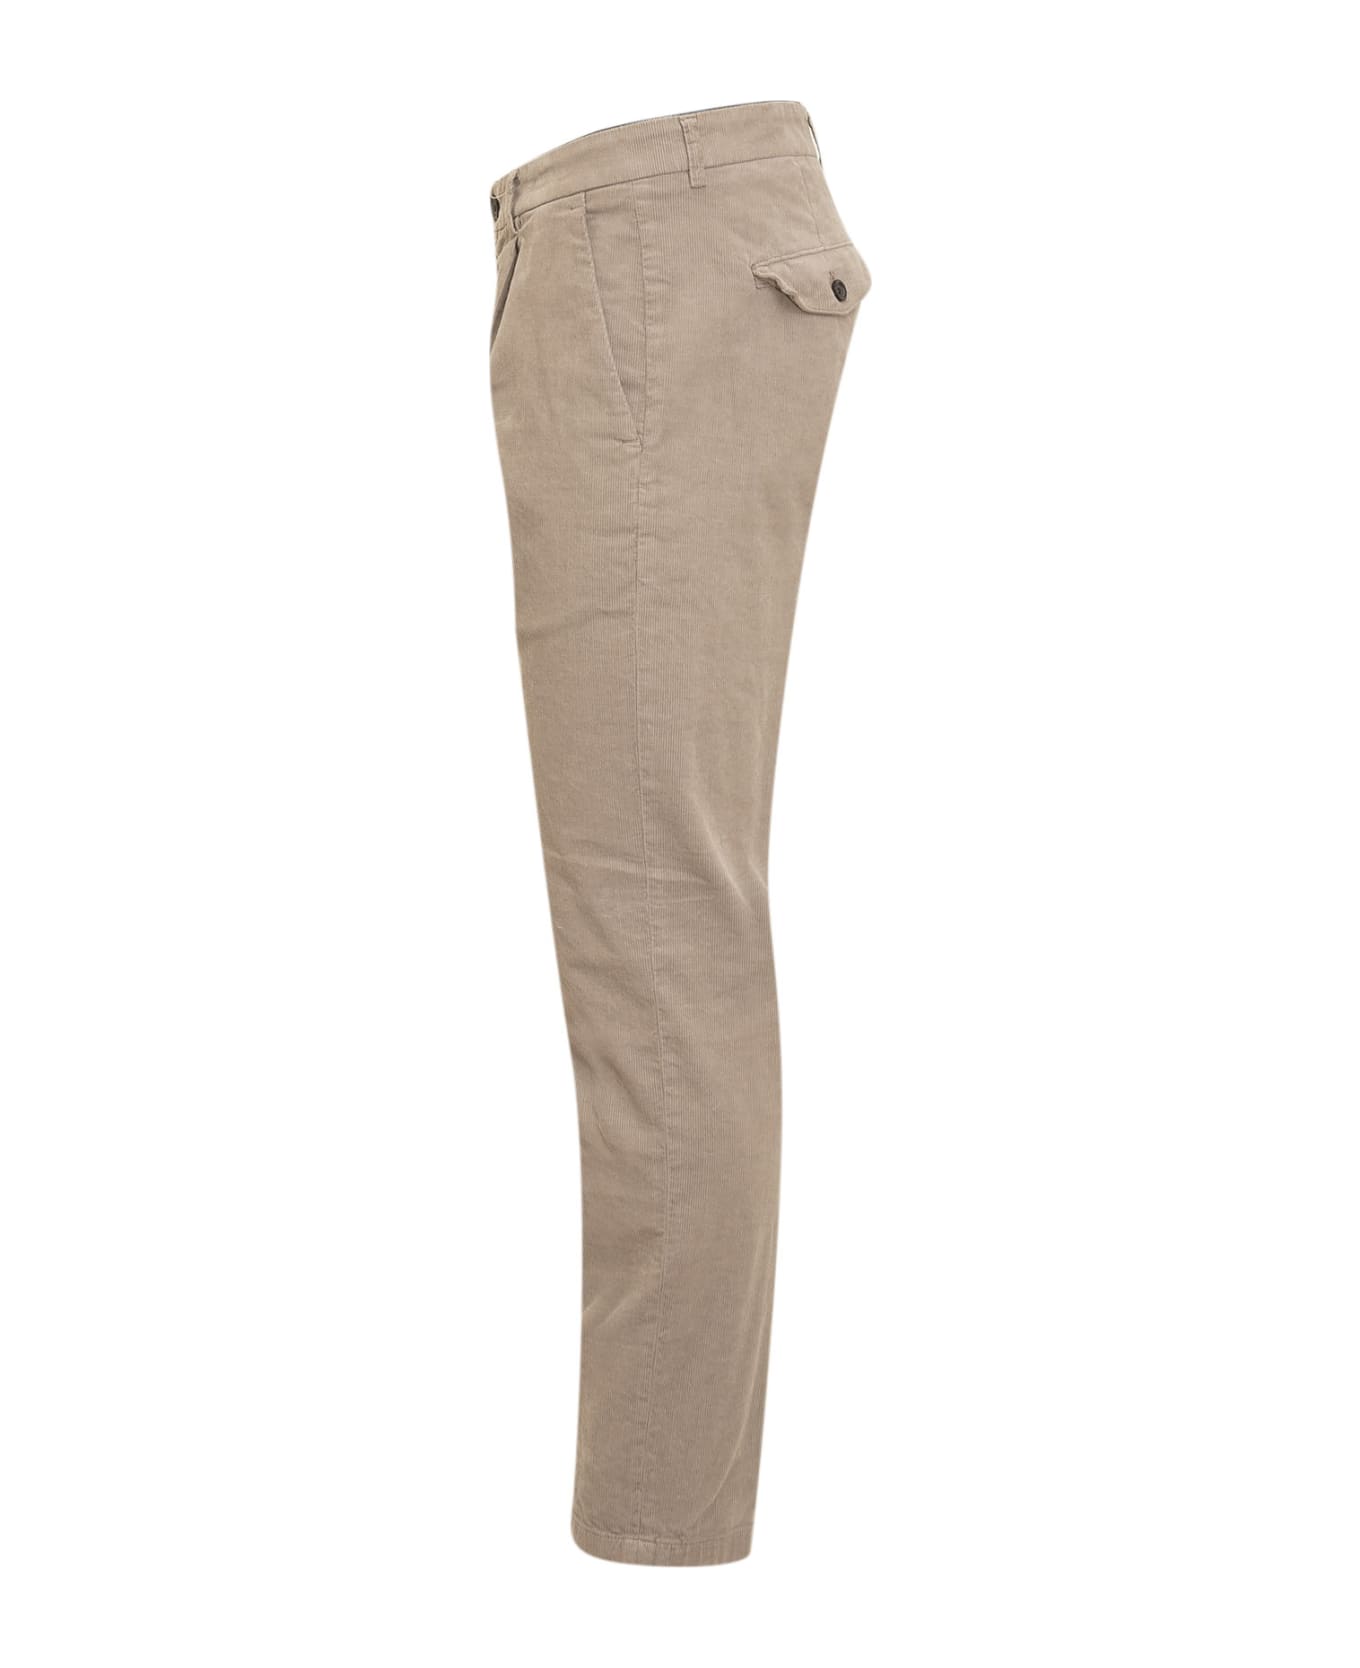 Department Five Prince Trousers Chinos - SAND